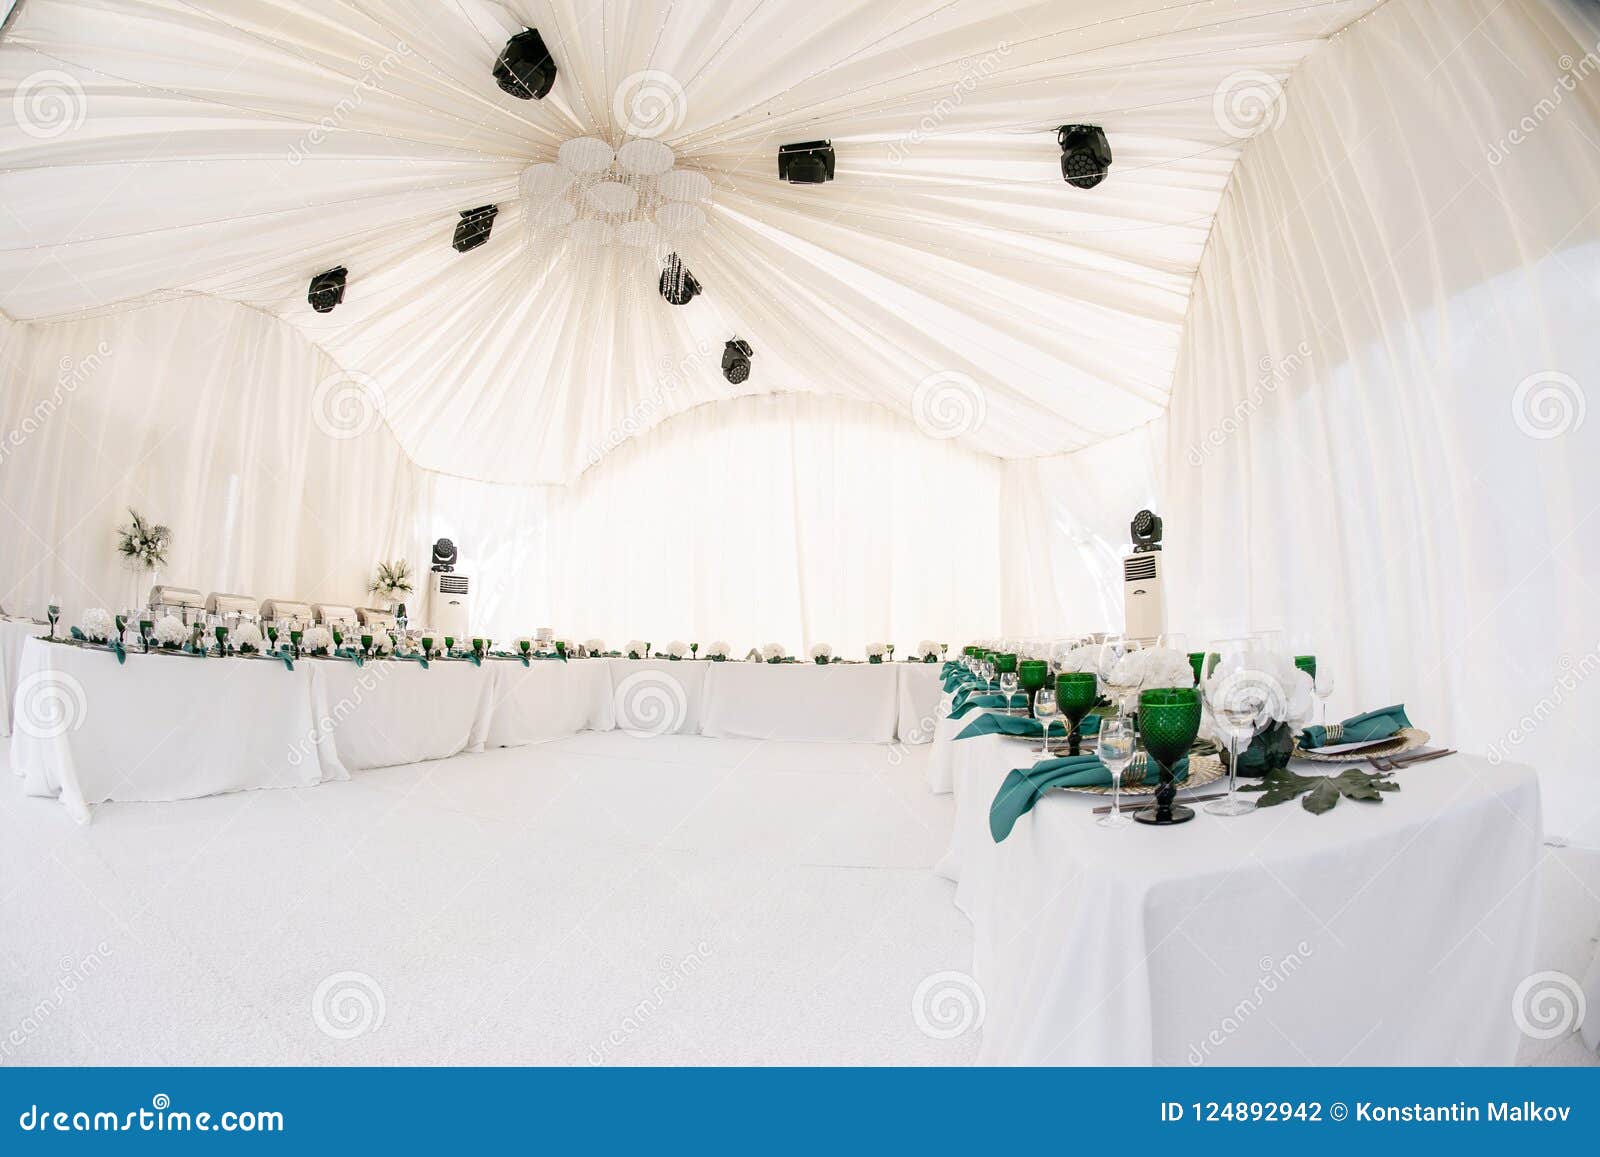 Beautiful Banquet Hall Under A Tent For A Wedding Reception